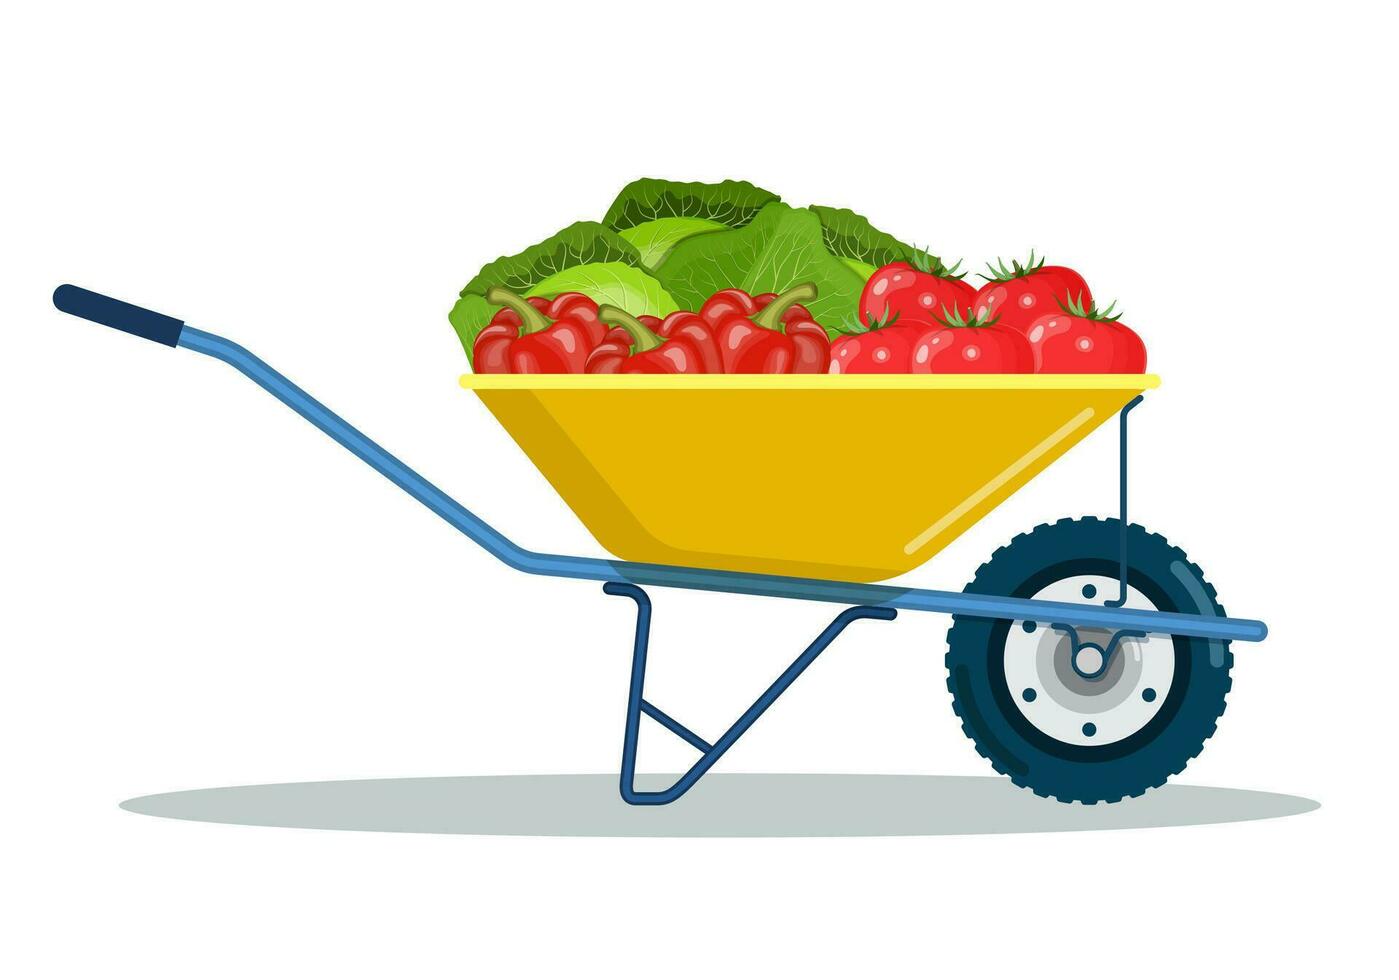 Garden cart with cabbage, peppers, tomatoes. Organic farm products. Metal wheelbarrow full of ripe vegetables. Vector illustration in flat style